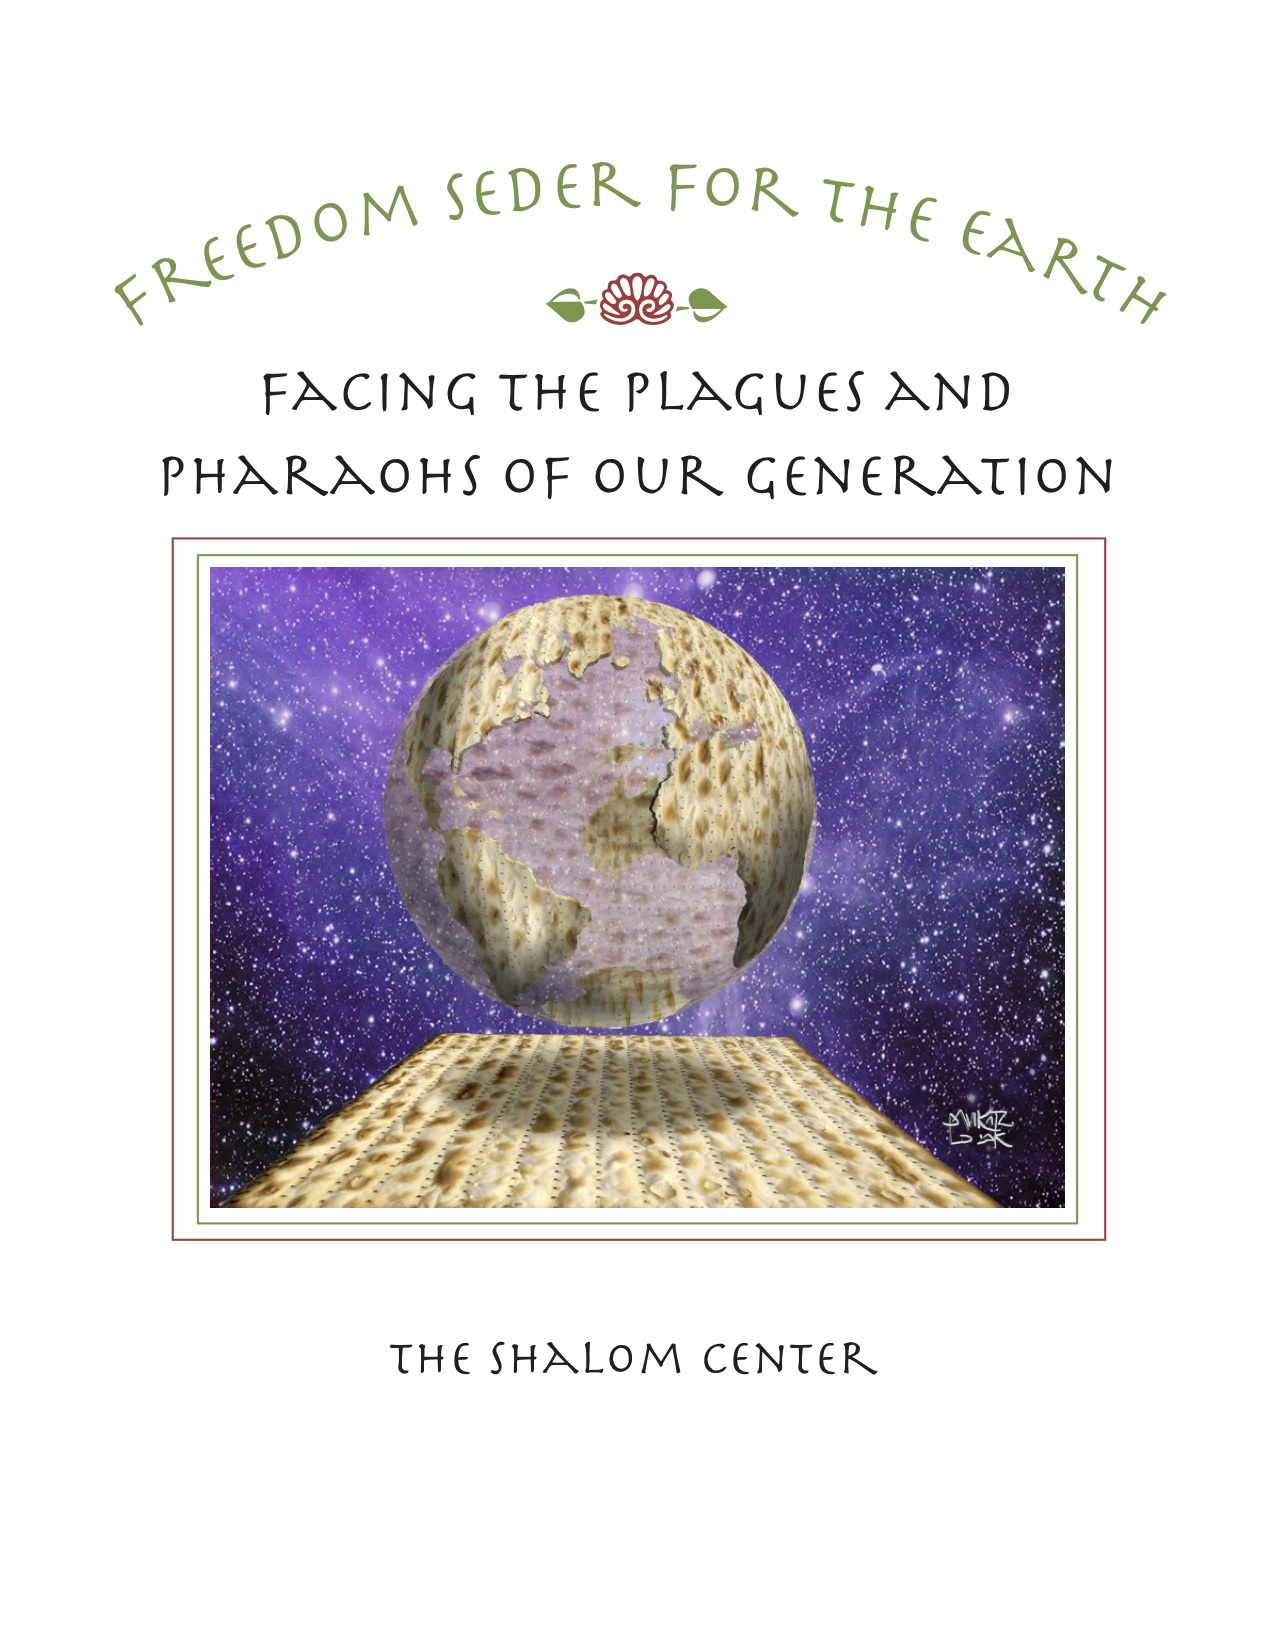 Freedom Seder for the Earth- Cover